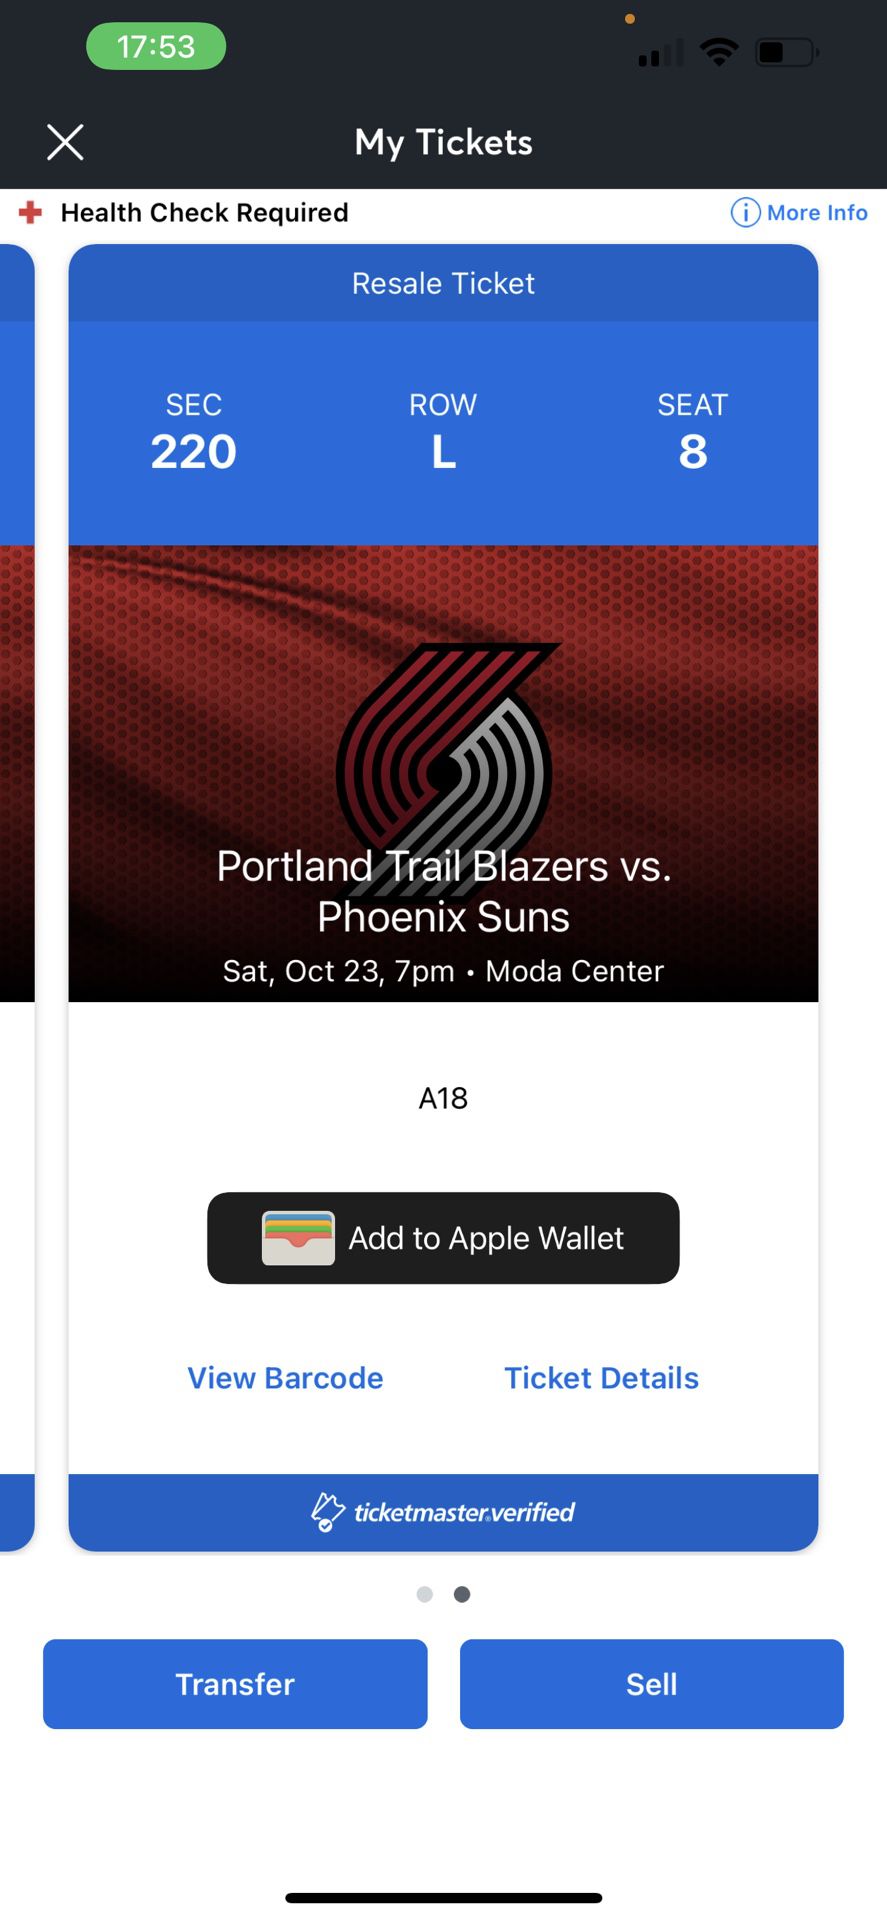 Tonight’s Game Trail Blazers Vs Suns $150 For Both. 200 Level Seats